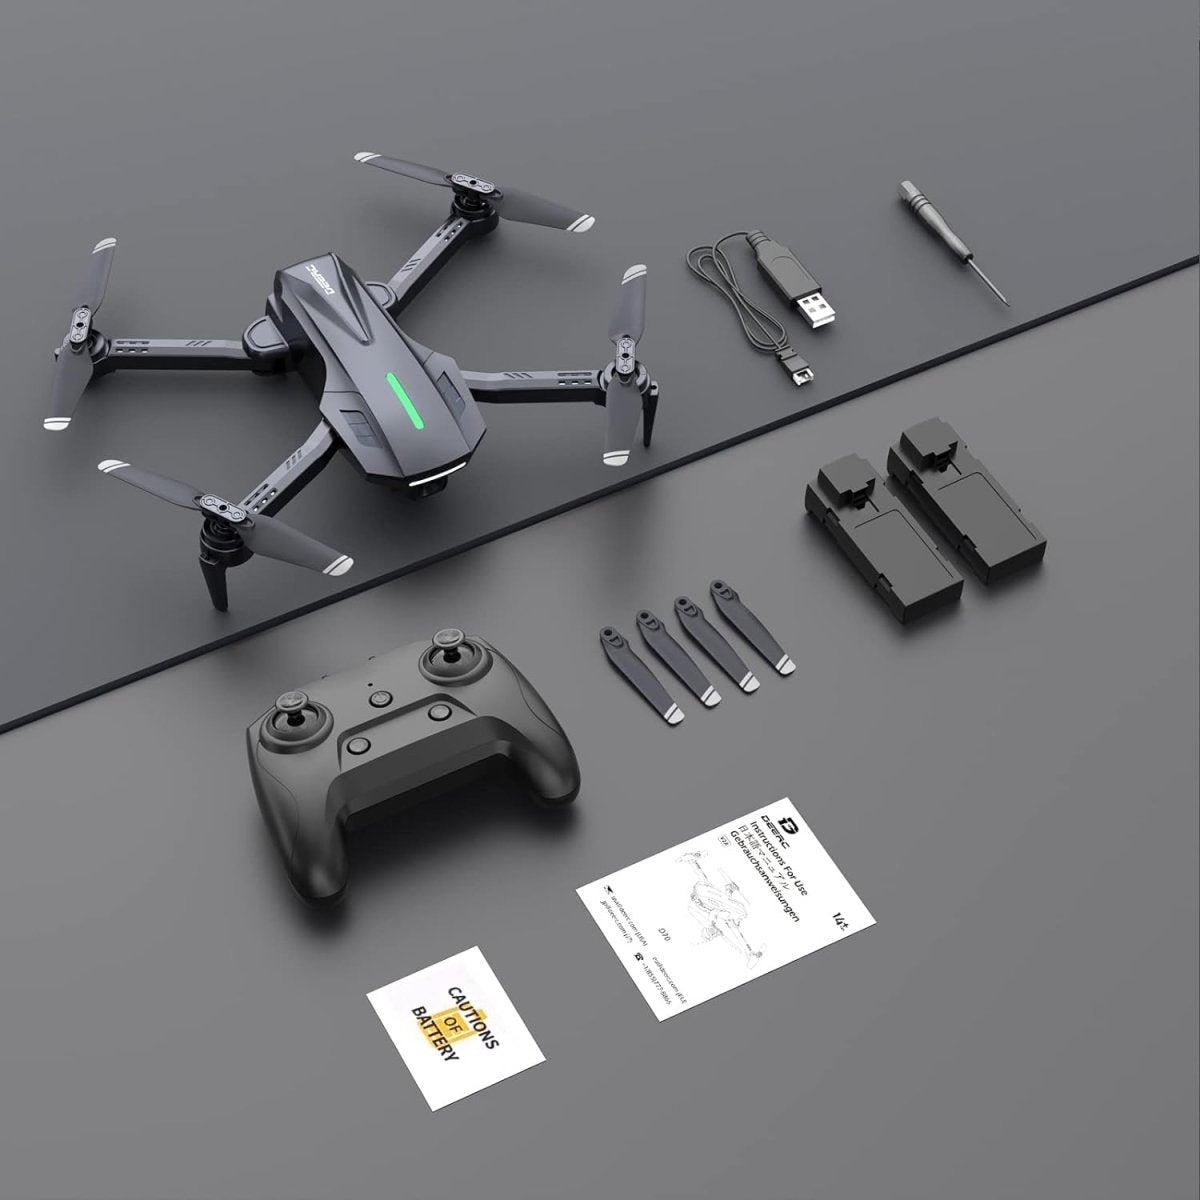 DEERC D70 Drone with 1080P HD Camera RC Foldable Quadcopter with 2 Batteries